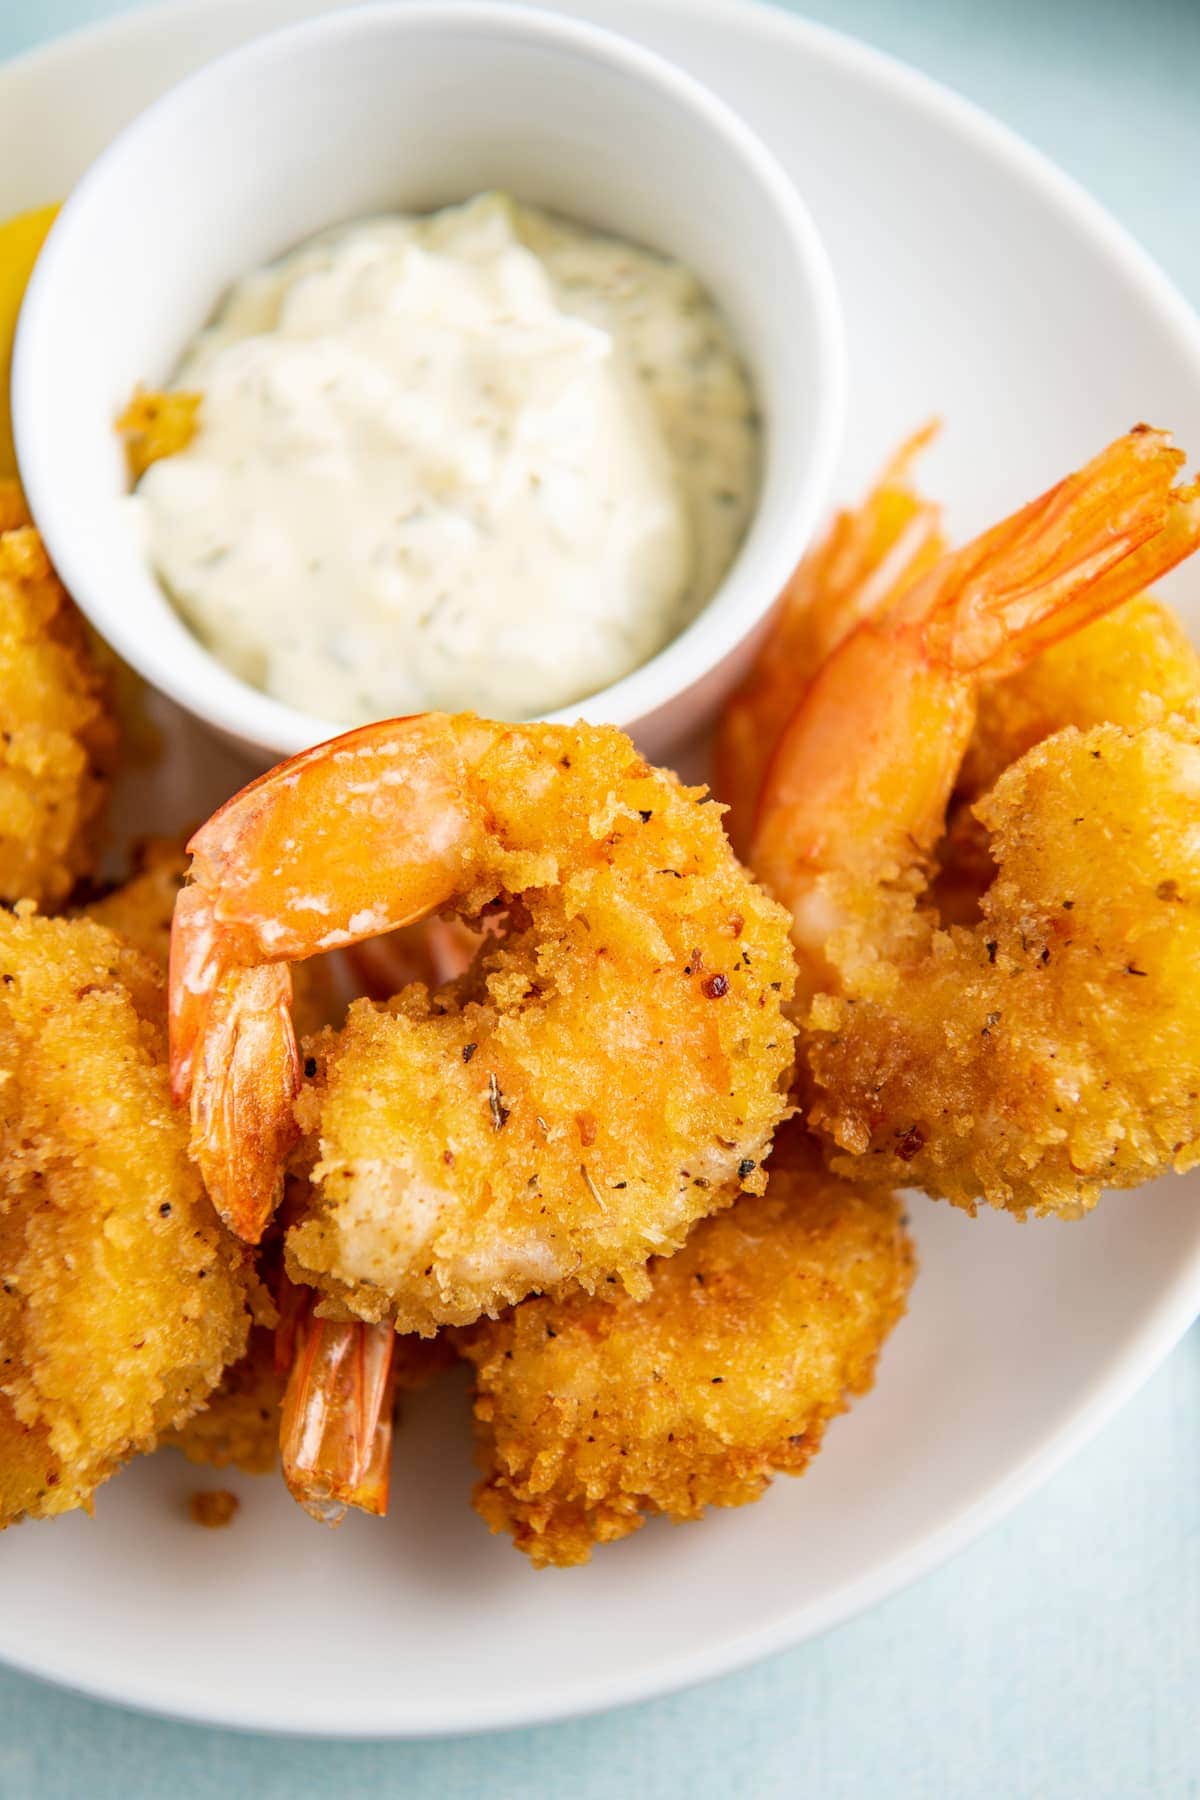 Fried shrimp on a white plate with a bowl of tartar sauce.